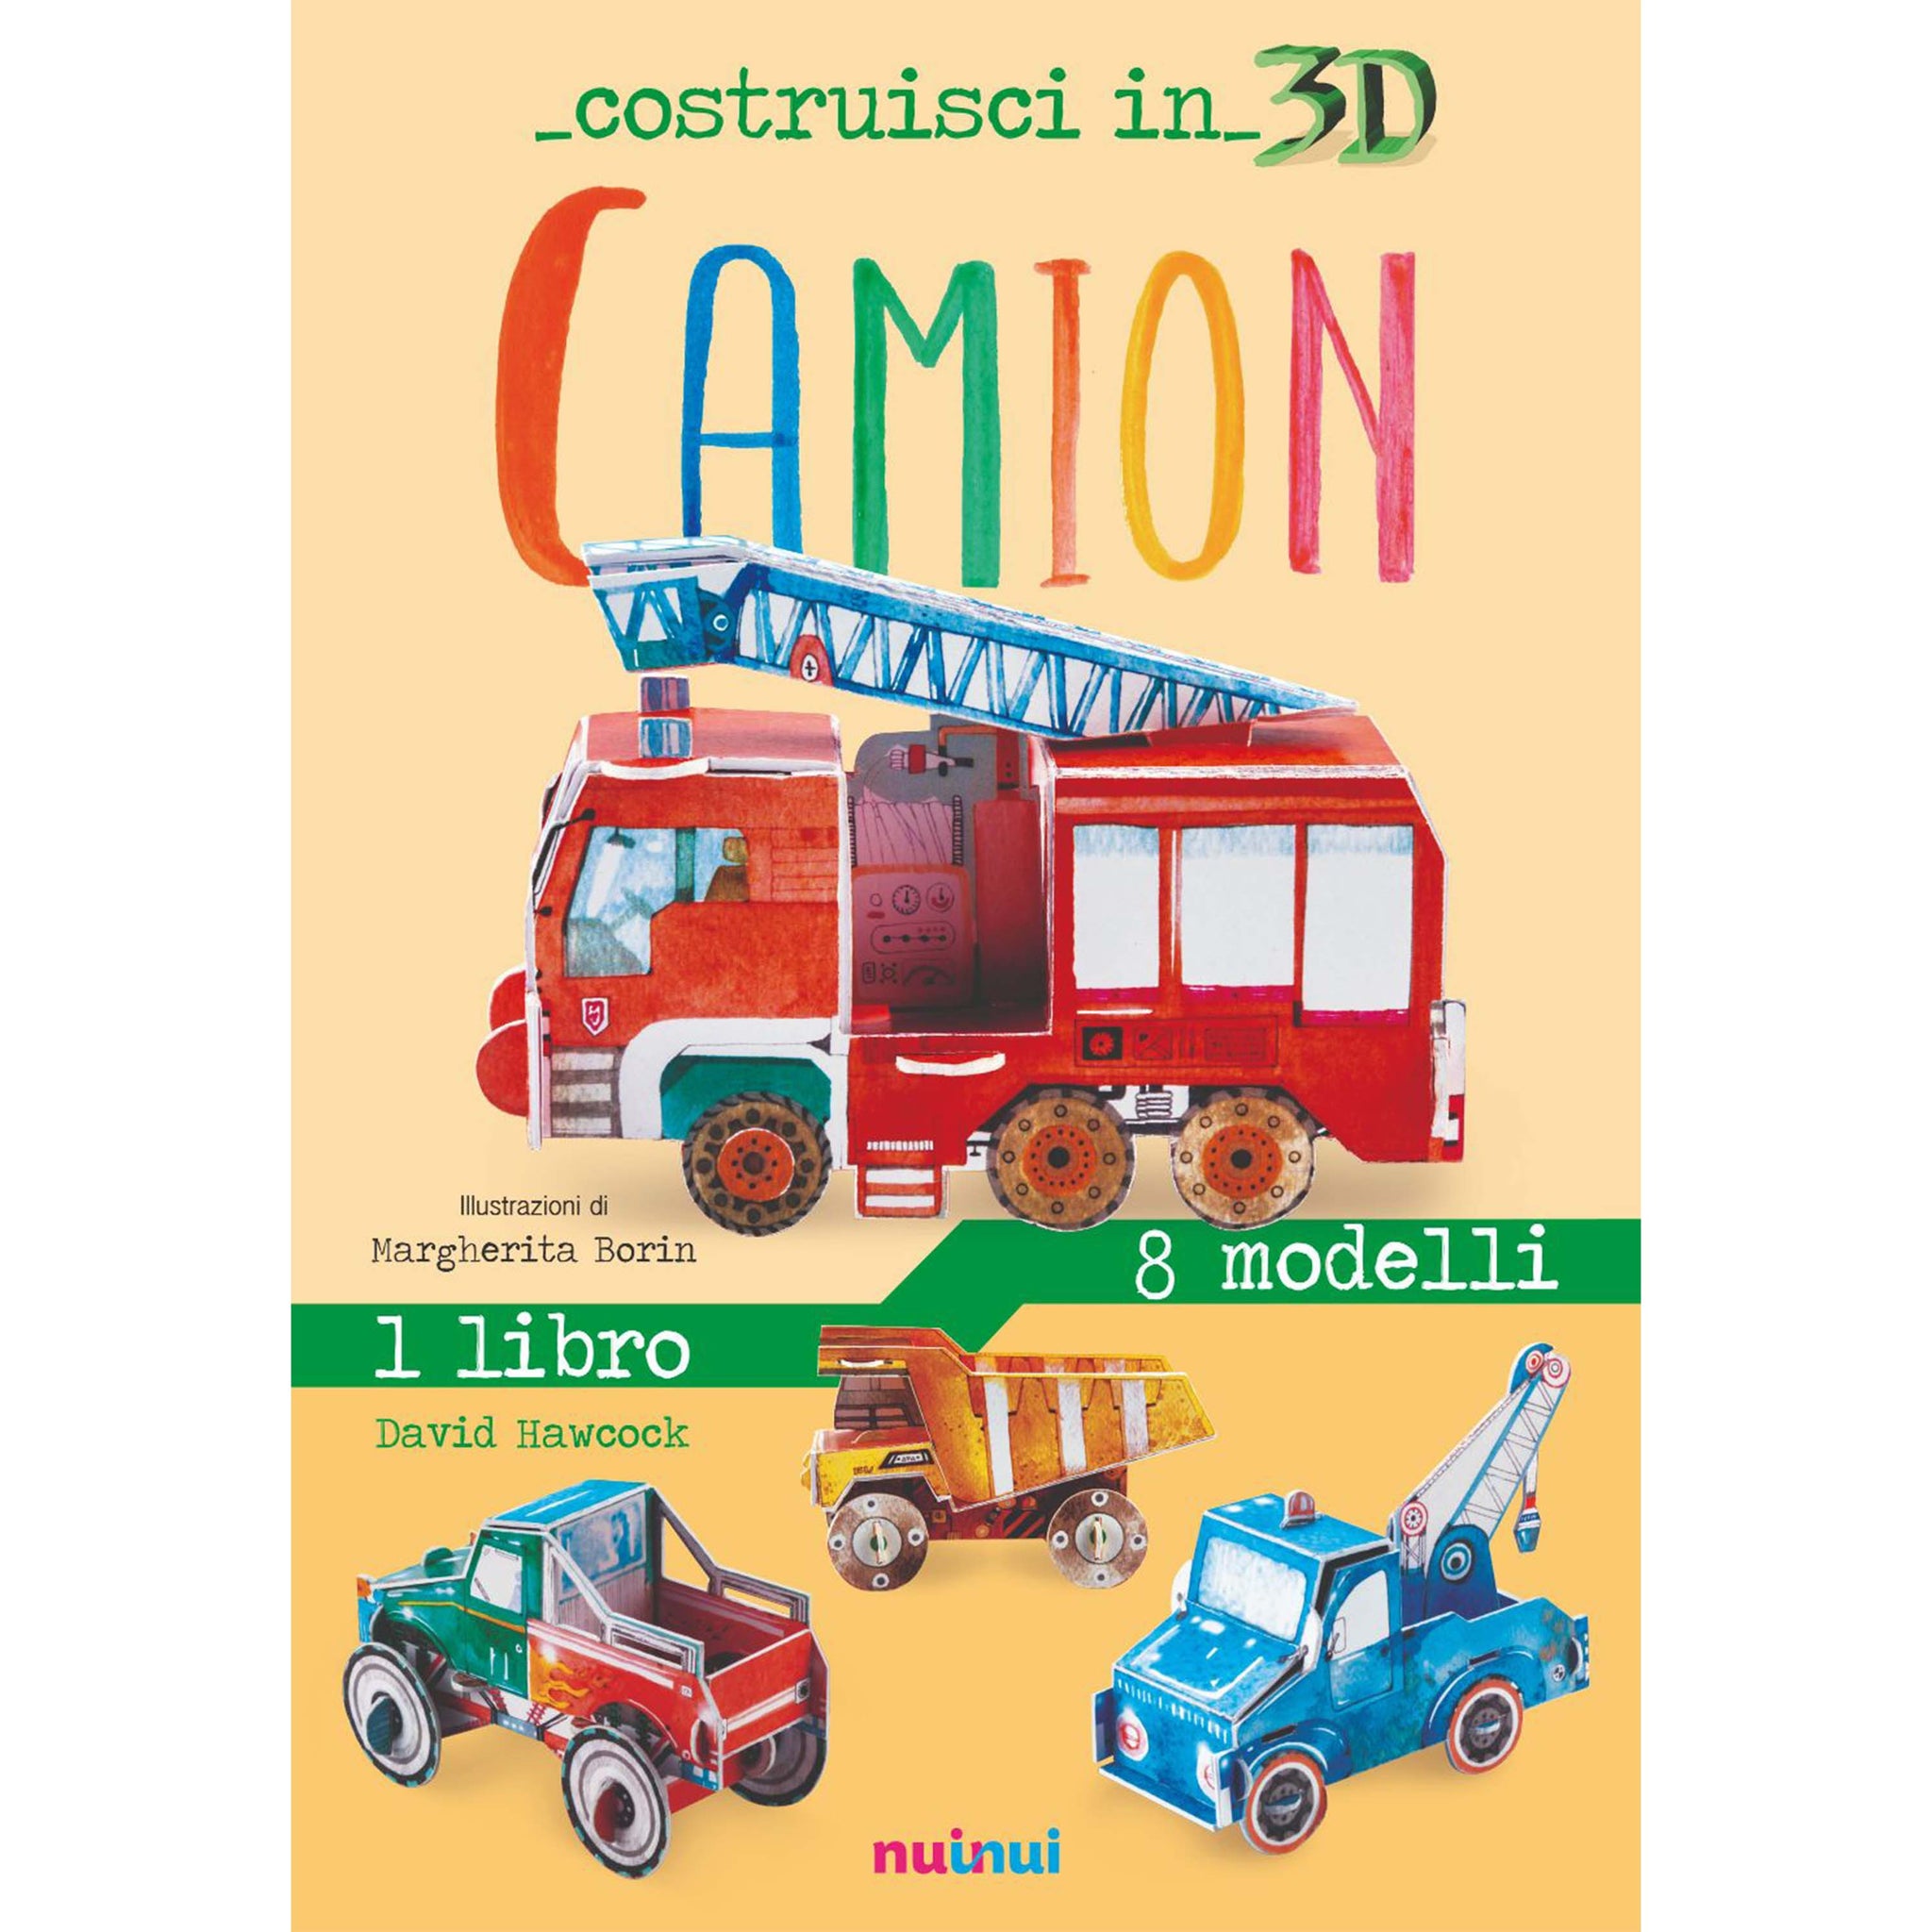 Costruisci in 3D - Camion